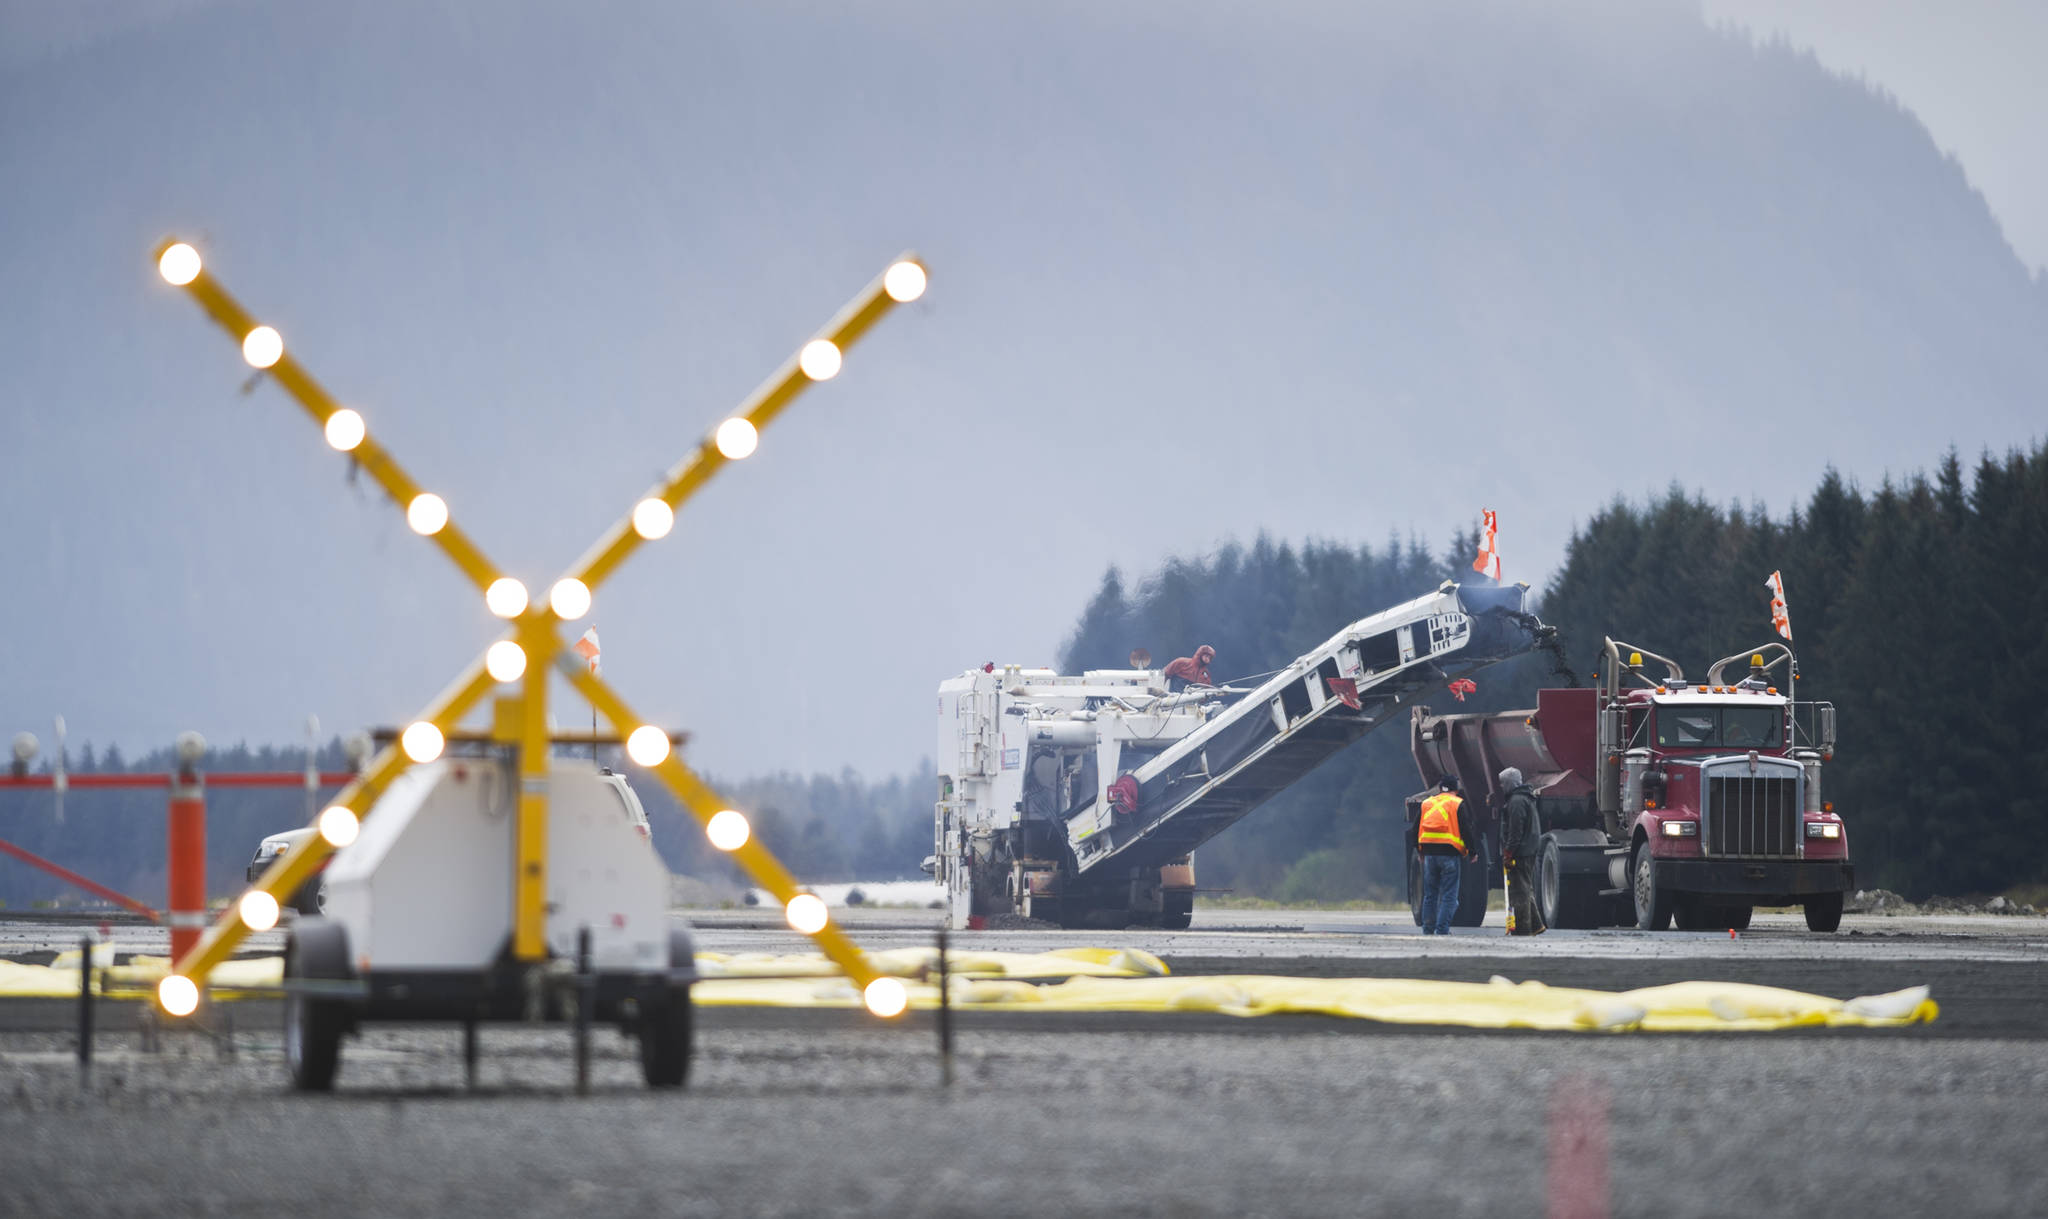 A flashing “X” signals the closed runway as crews work on a repaving project at the Juneau International Airport in 2015. (Michael Penn | Juneau Empire)